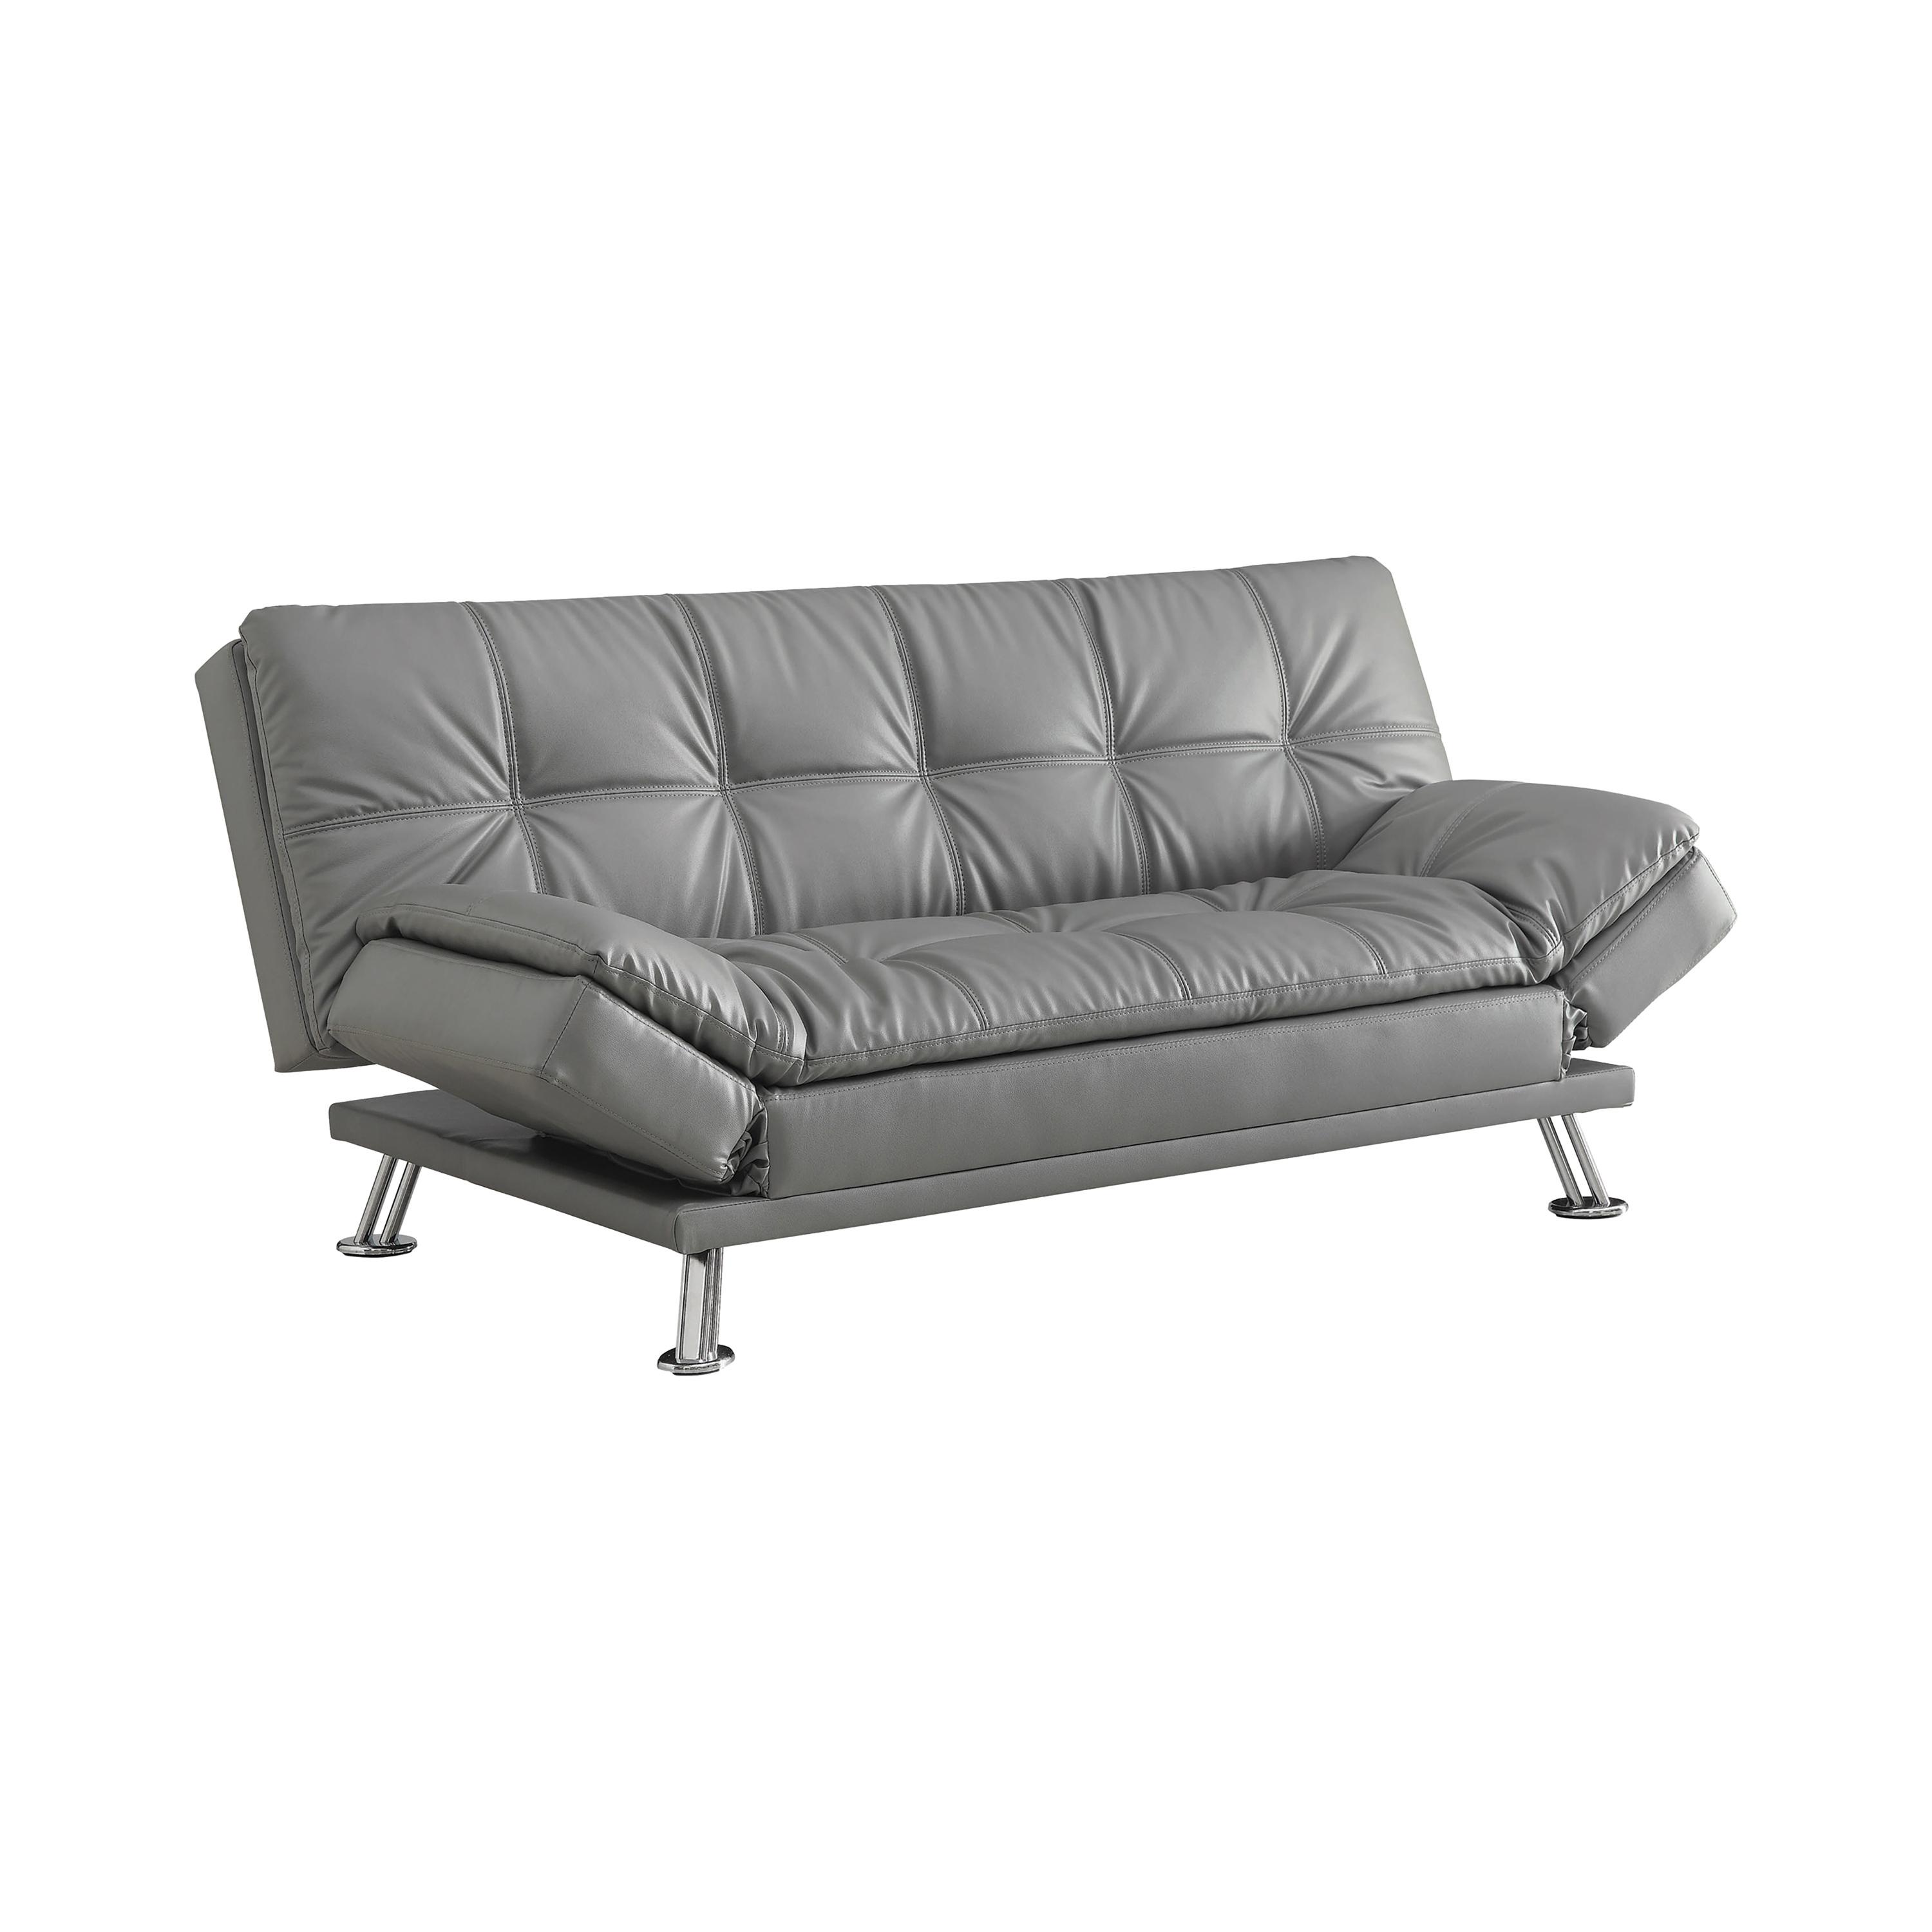 Modern Sofa bed 500096 Dilleston 500096 in Gray Leatherette